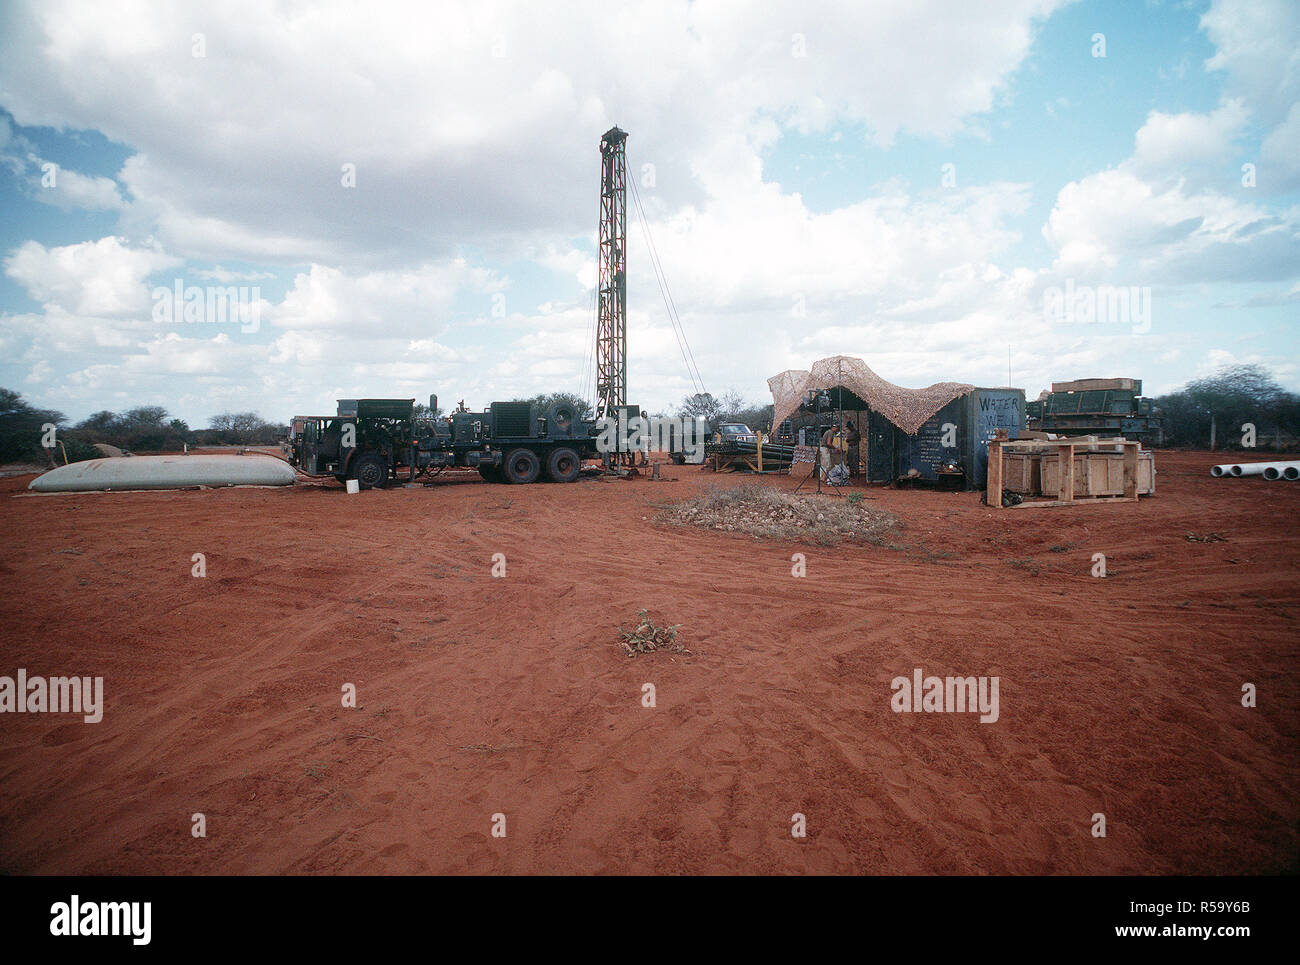 1993 - A view of a water drilling rig being operated by Naval Mobile Construction Battalion 1 (NMCB-1).  The well, near Bale Dogle, is intended to supply an old Soviet air base being used by U.S. and Moroccan personnel participating in the multinational relief effort OPERATION RESTORE HOPE. Stock Photo